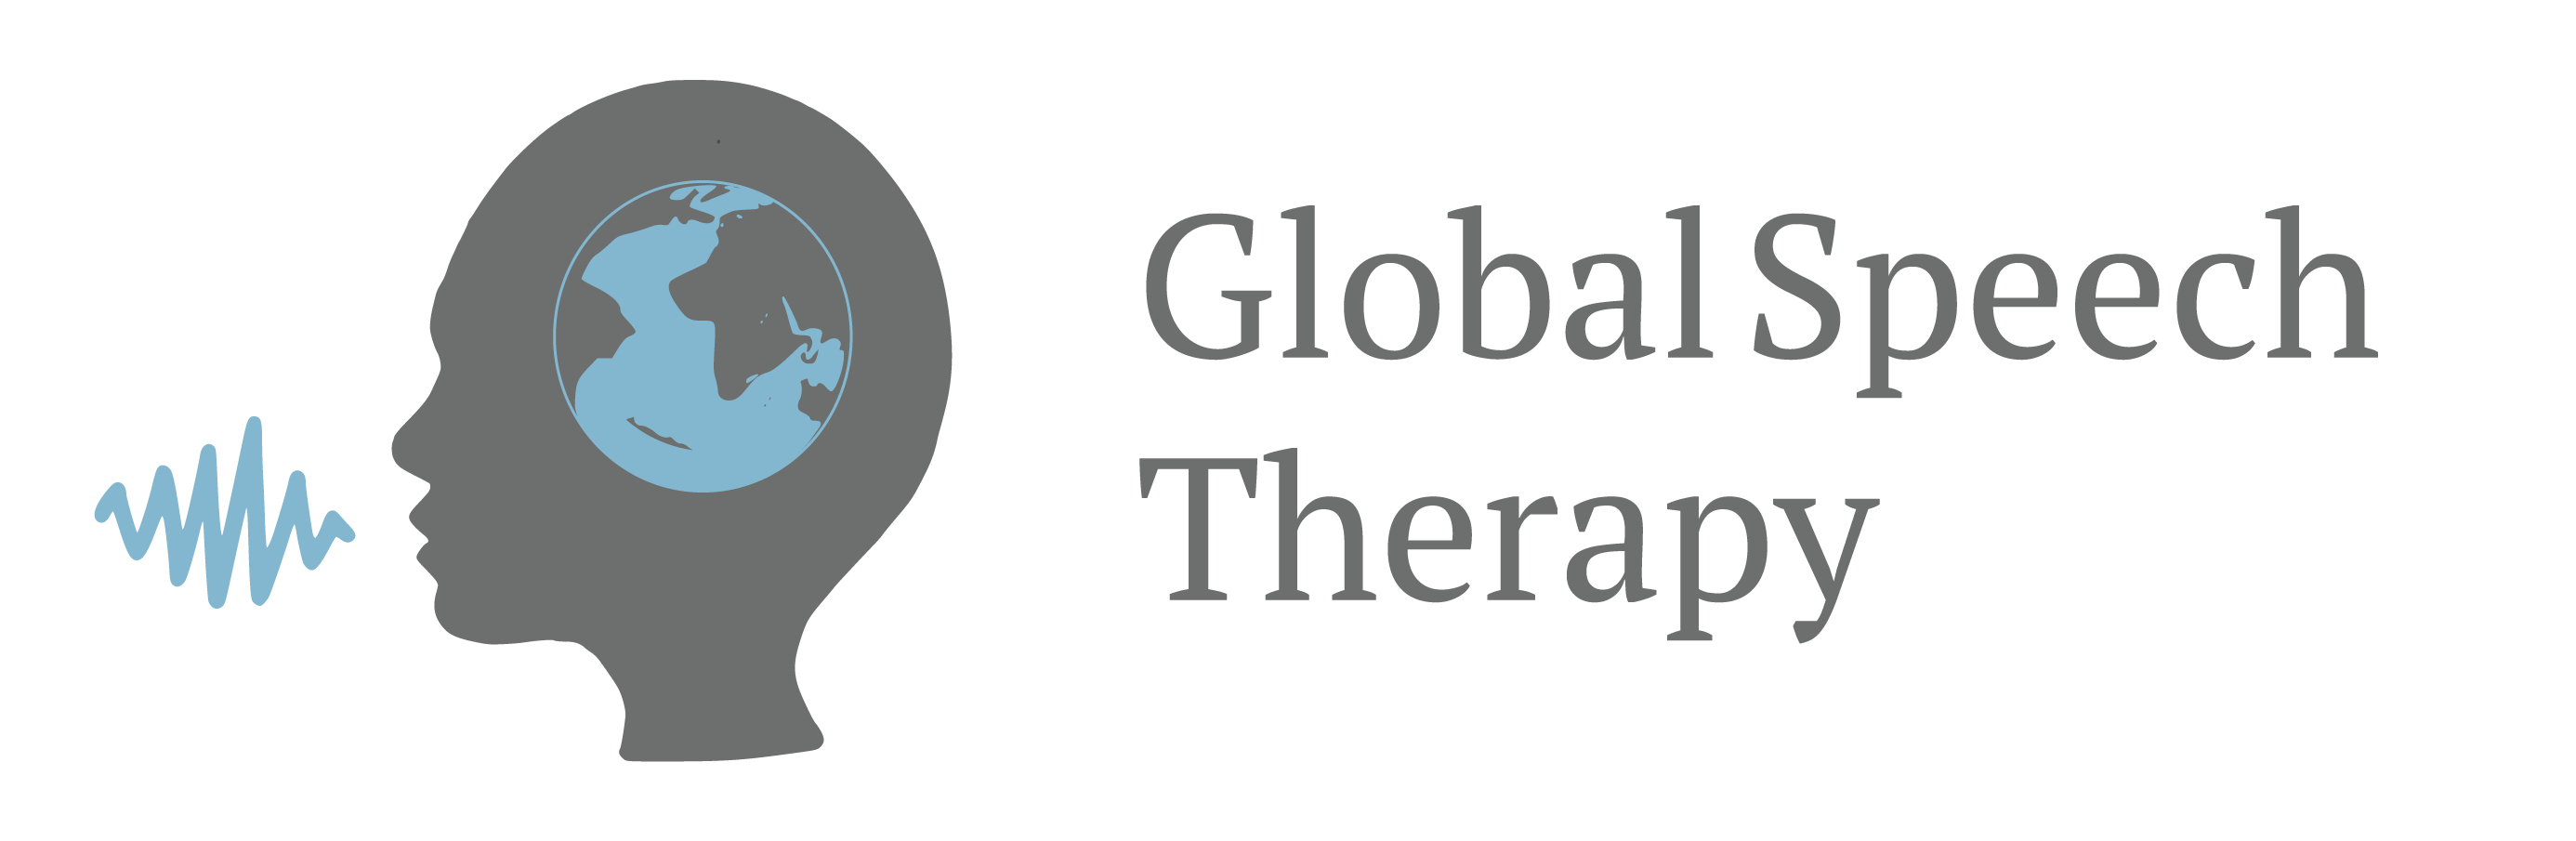 Global Speech Therapy